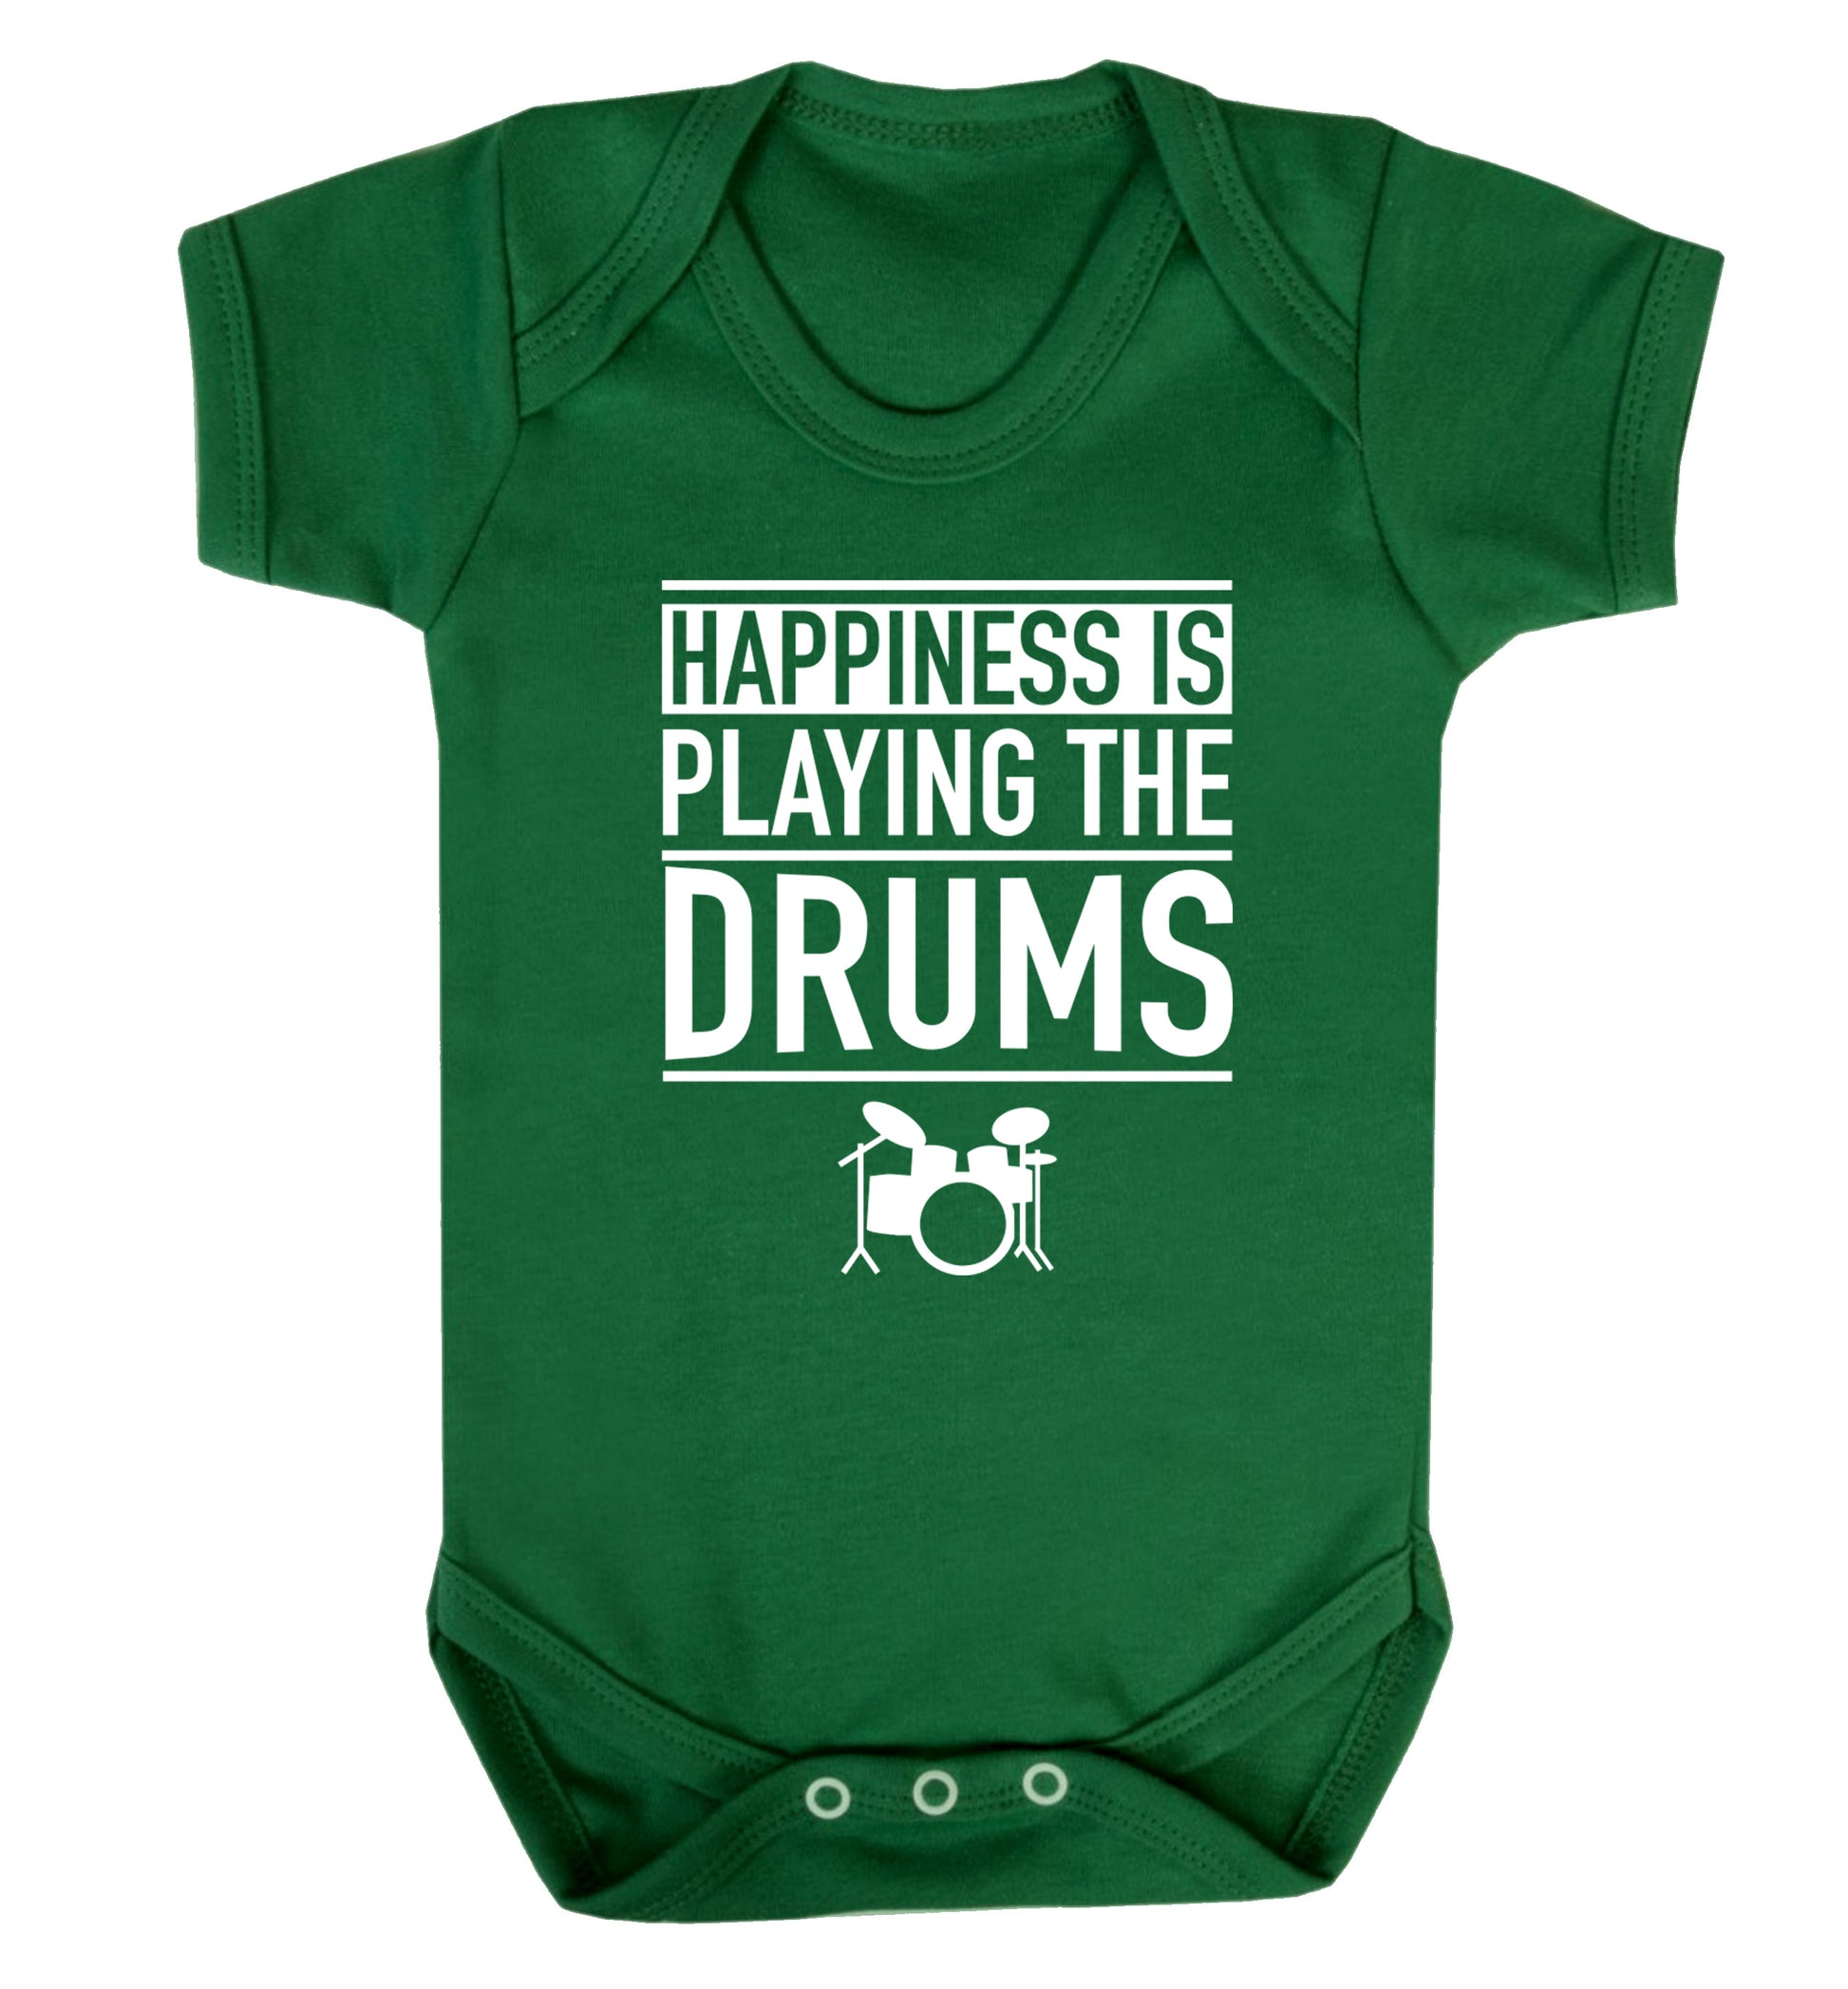 Happiness is playing the drums Baby Vest green 18-24 months